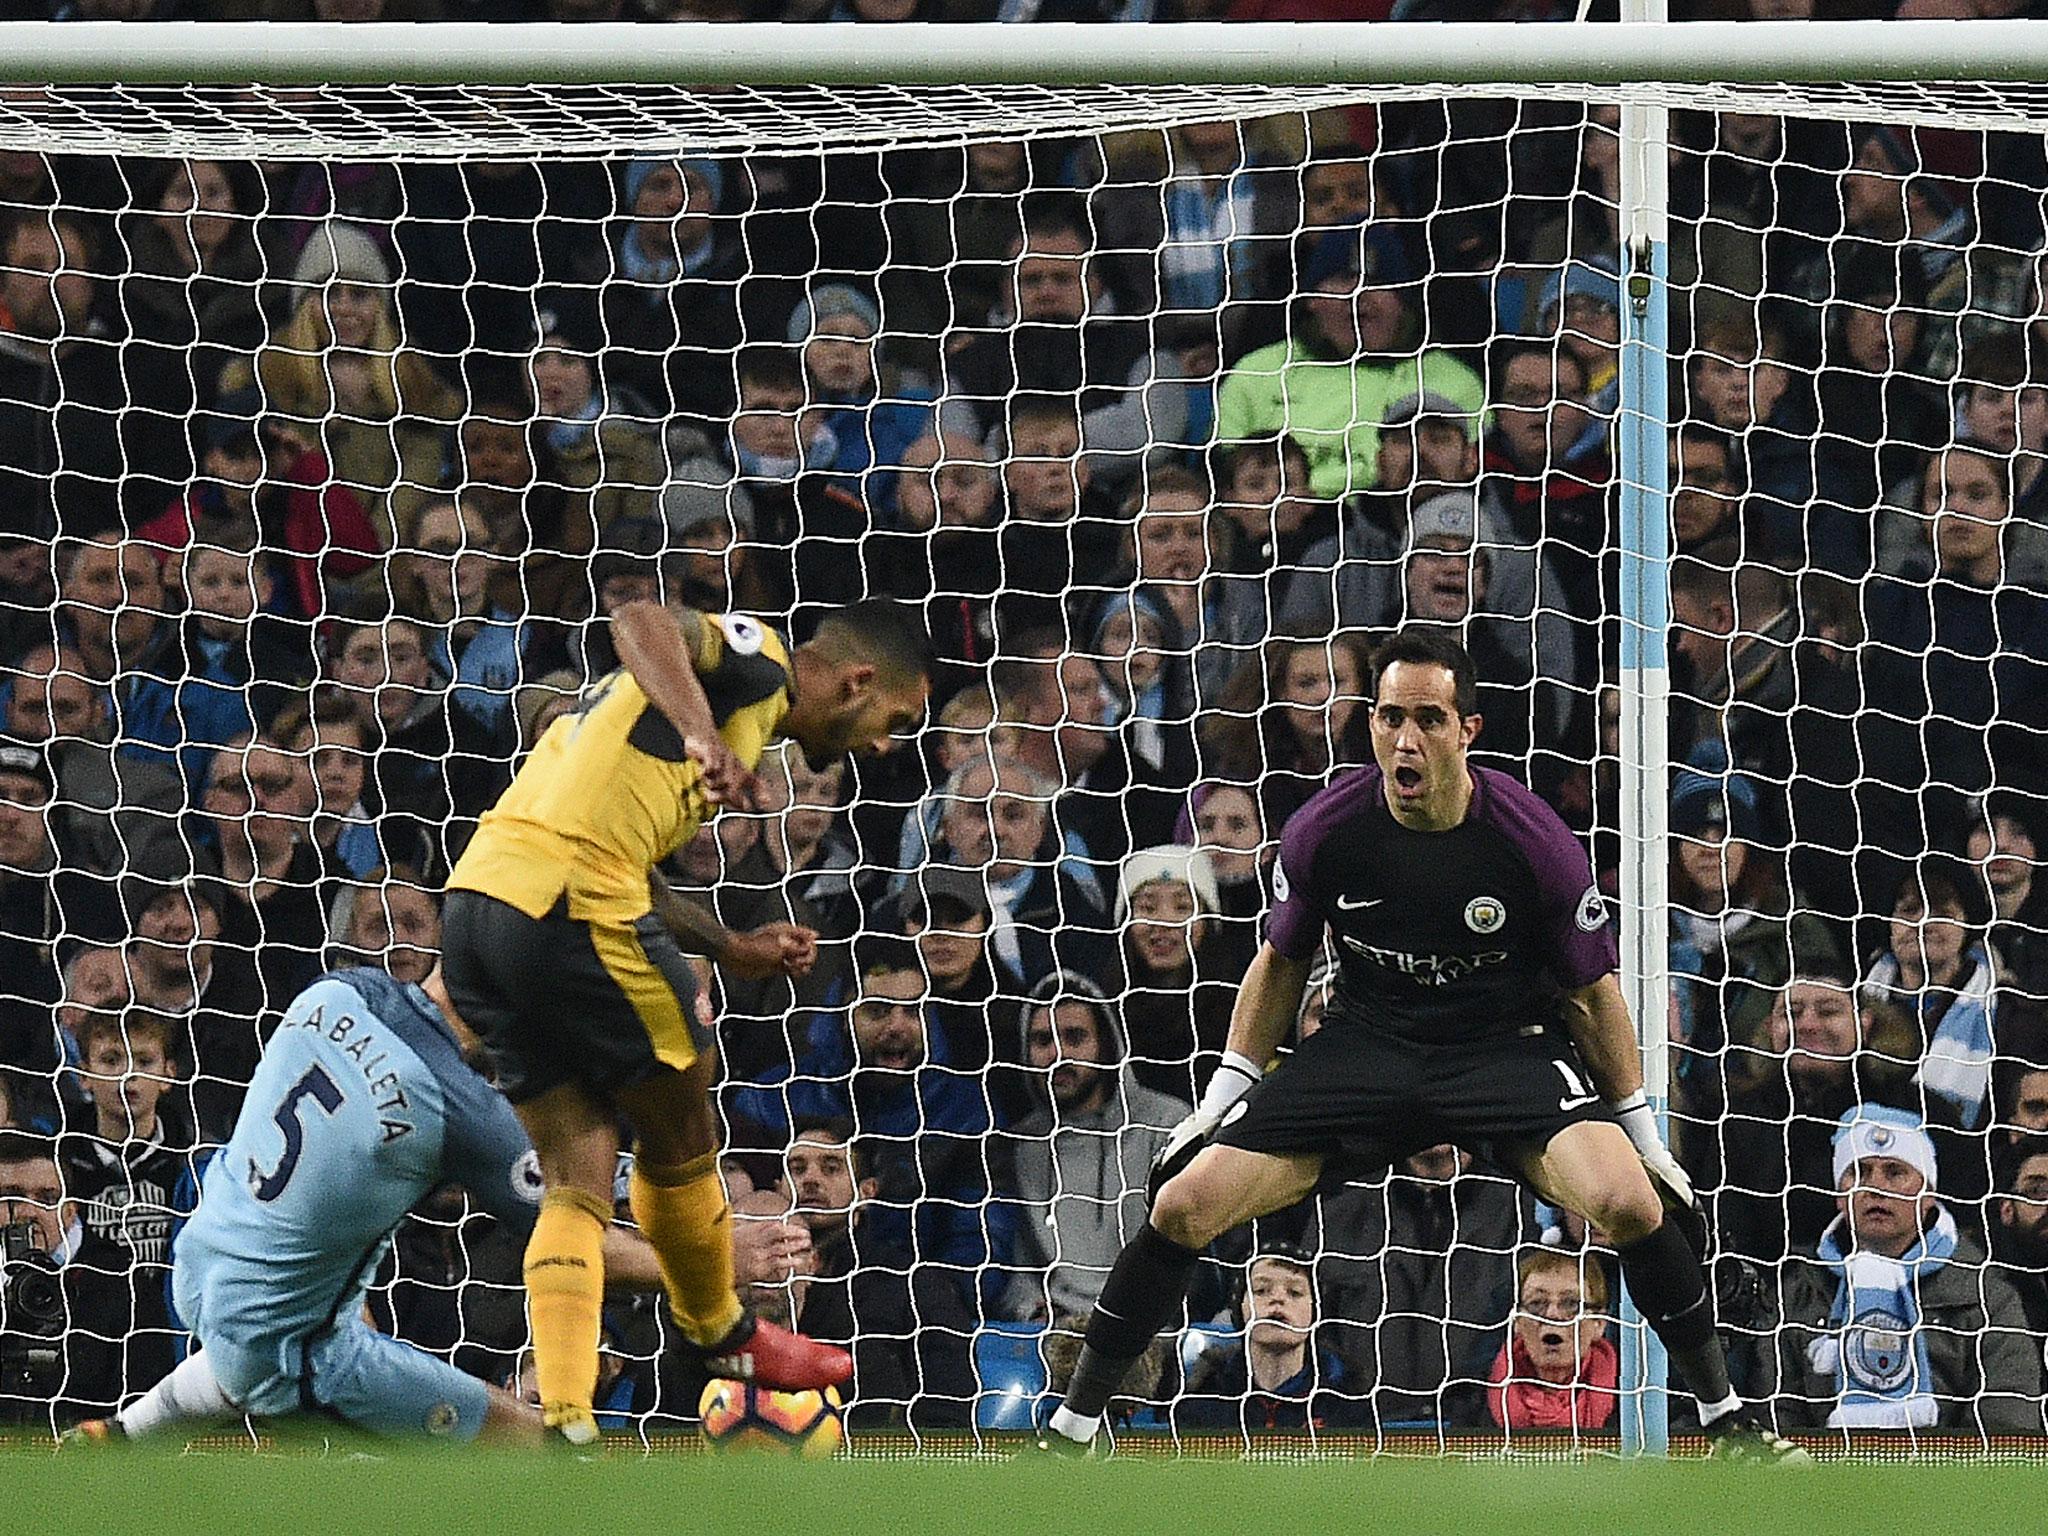 Bravo committed himself early as Walcott delicately tucked the ball away